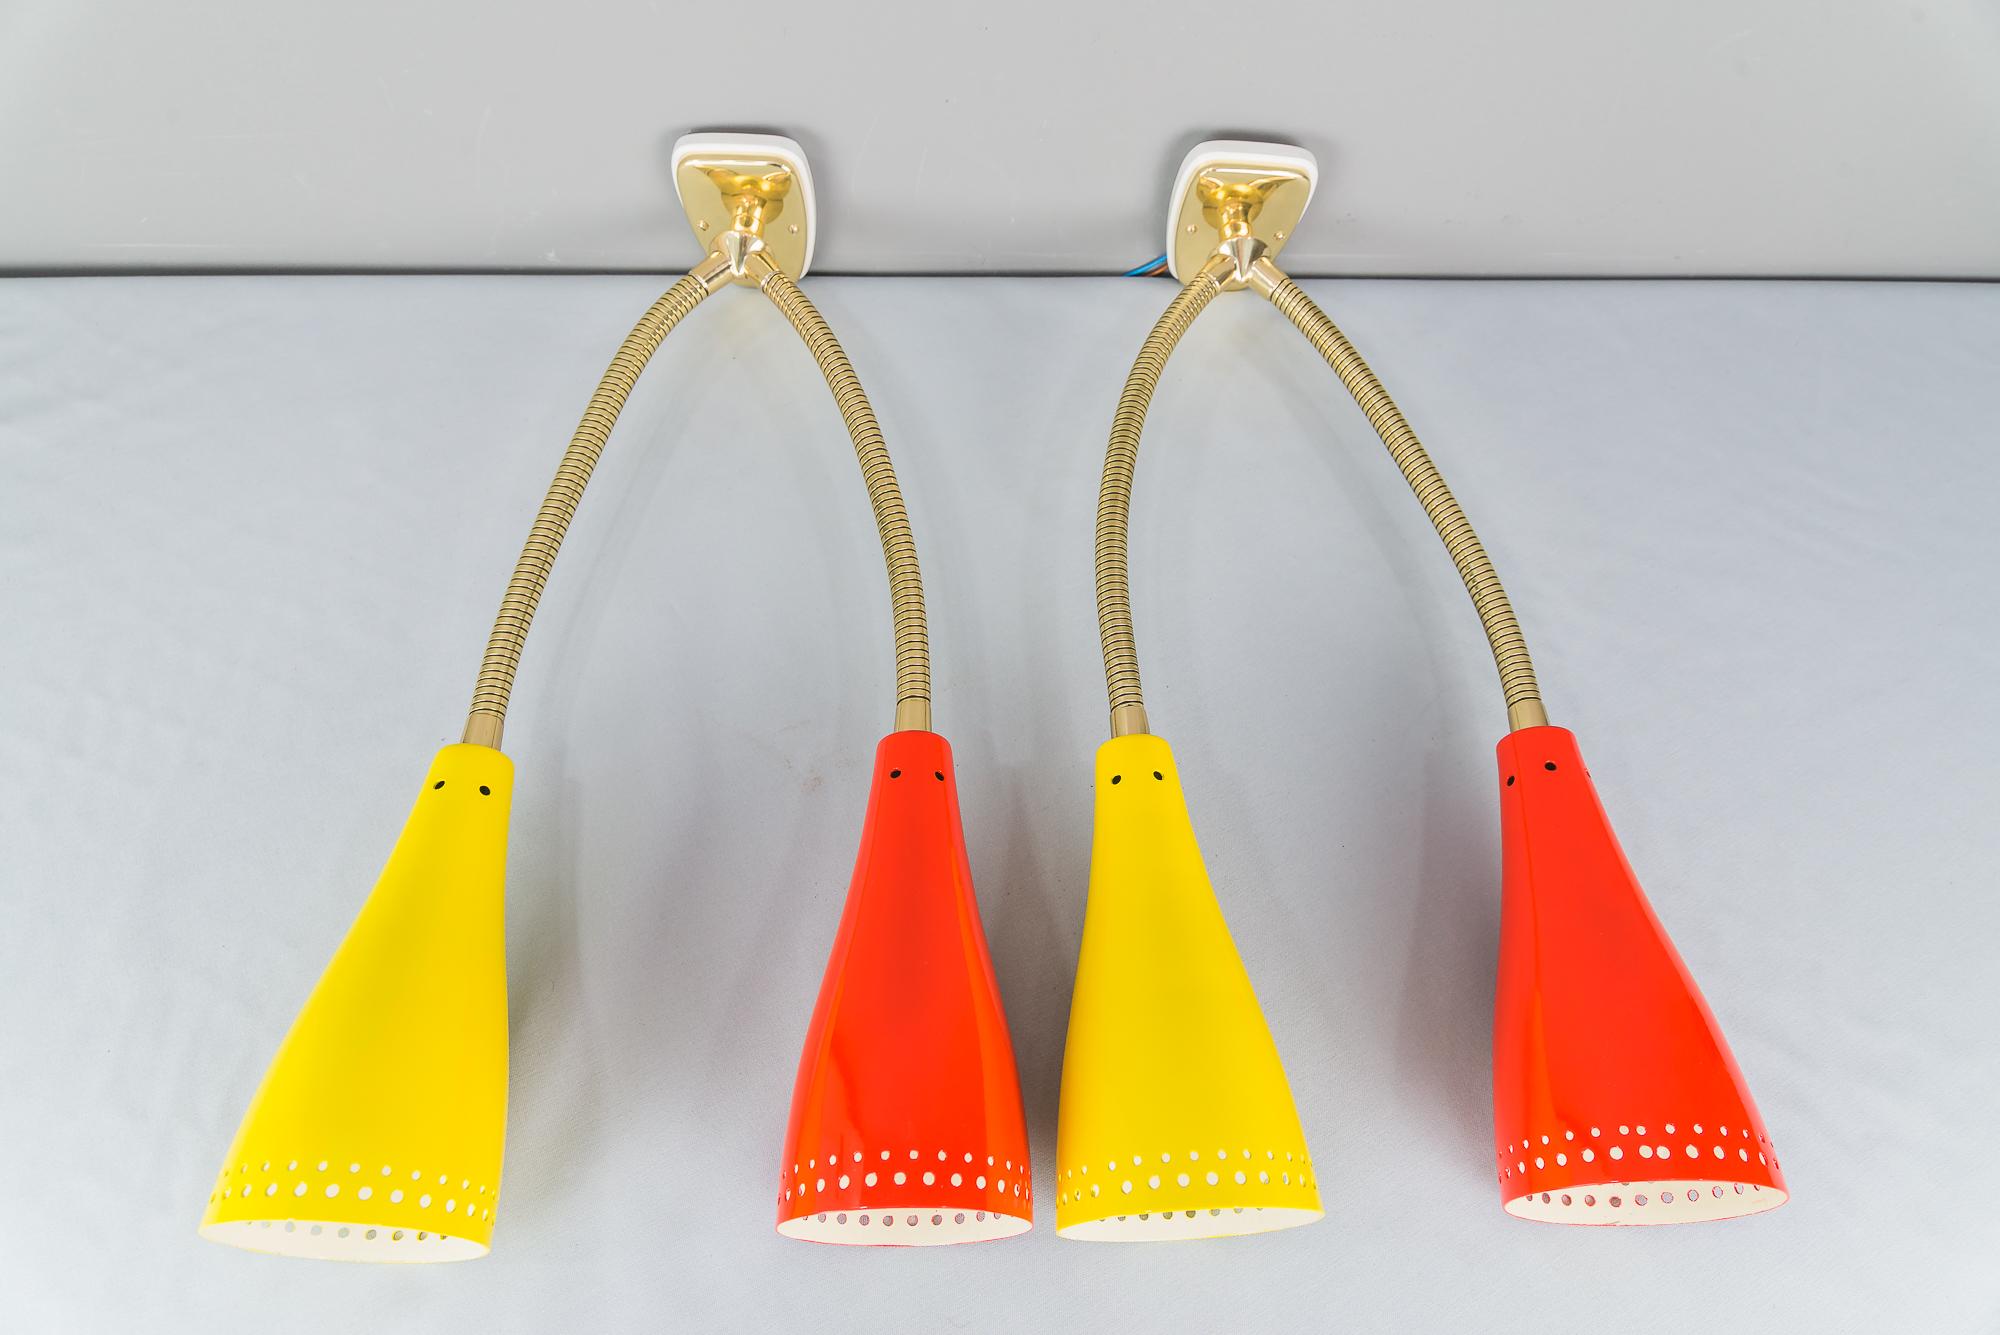 Two wall lamps by J.T. Kalmar, circa 1950s.
Original condition only the shade are painted new.
On-off switch on the shades.
Wide is from 20-90 cm.
we only have exactly the same ones with an on and off switch on the shades.